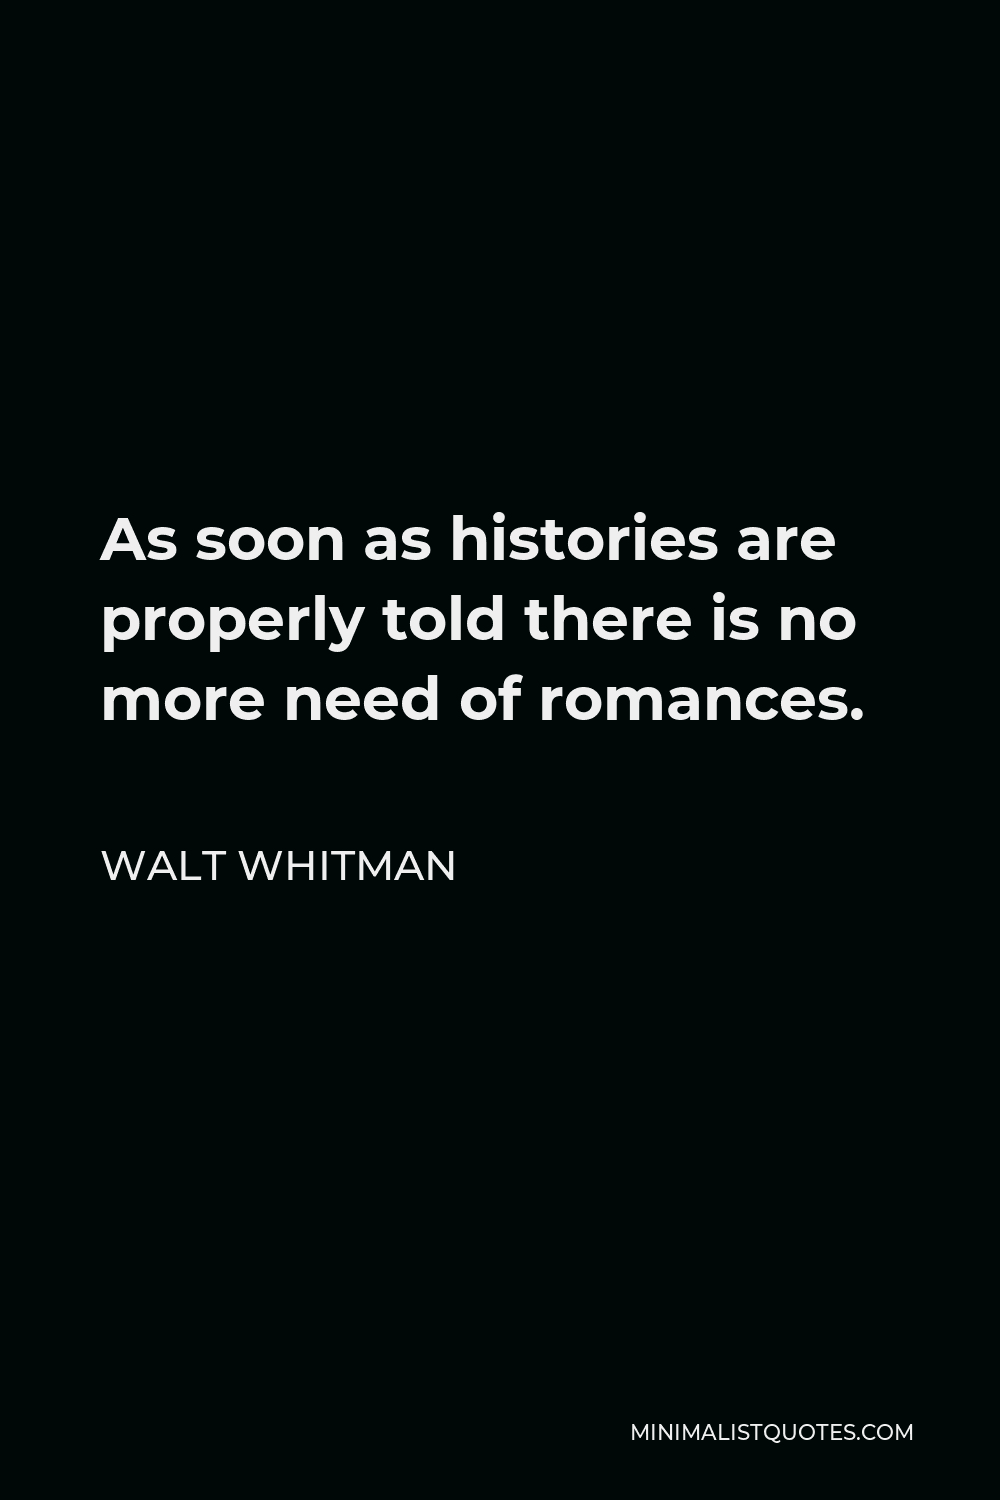 Walt Whitman Quote - As soon as histories are properly told there is no more need of romances.